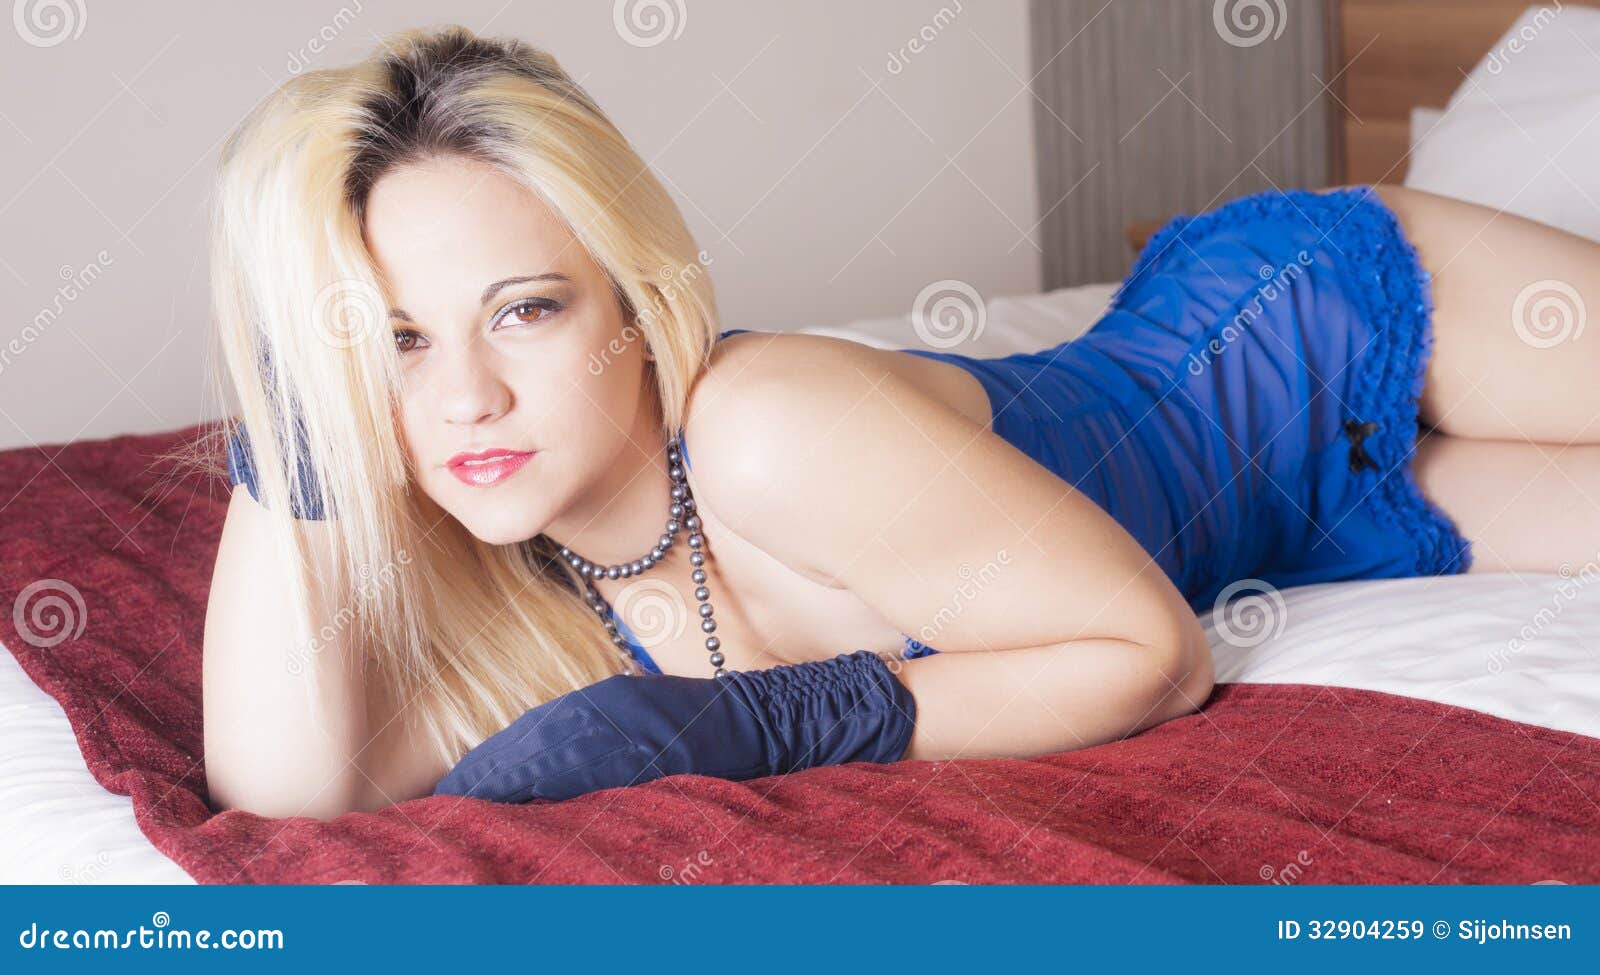 Sex blonde on bed stock image